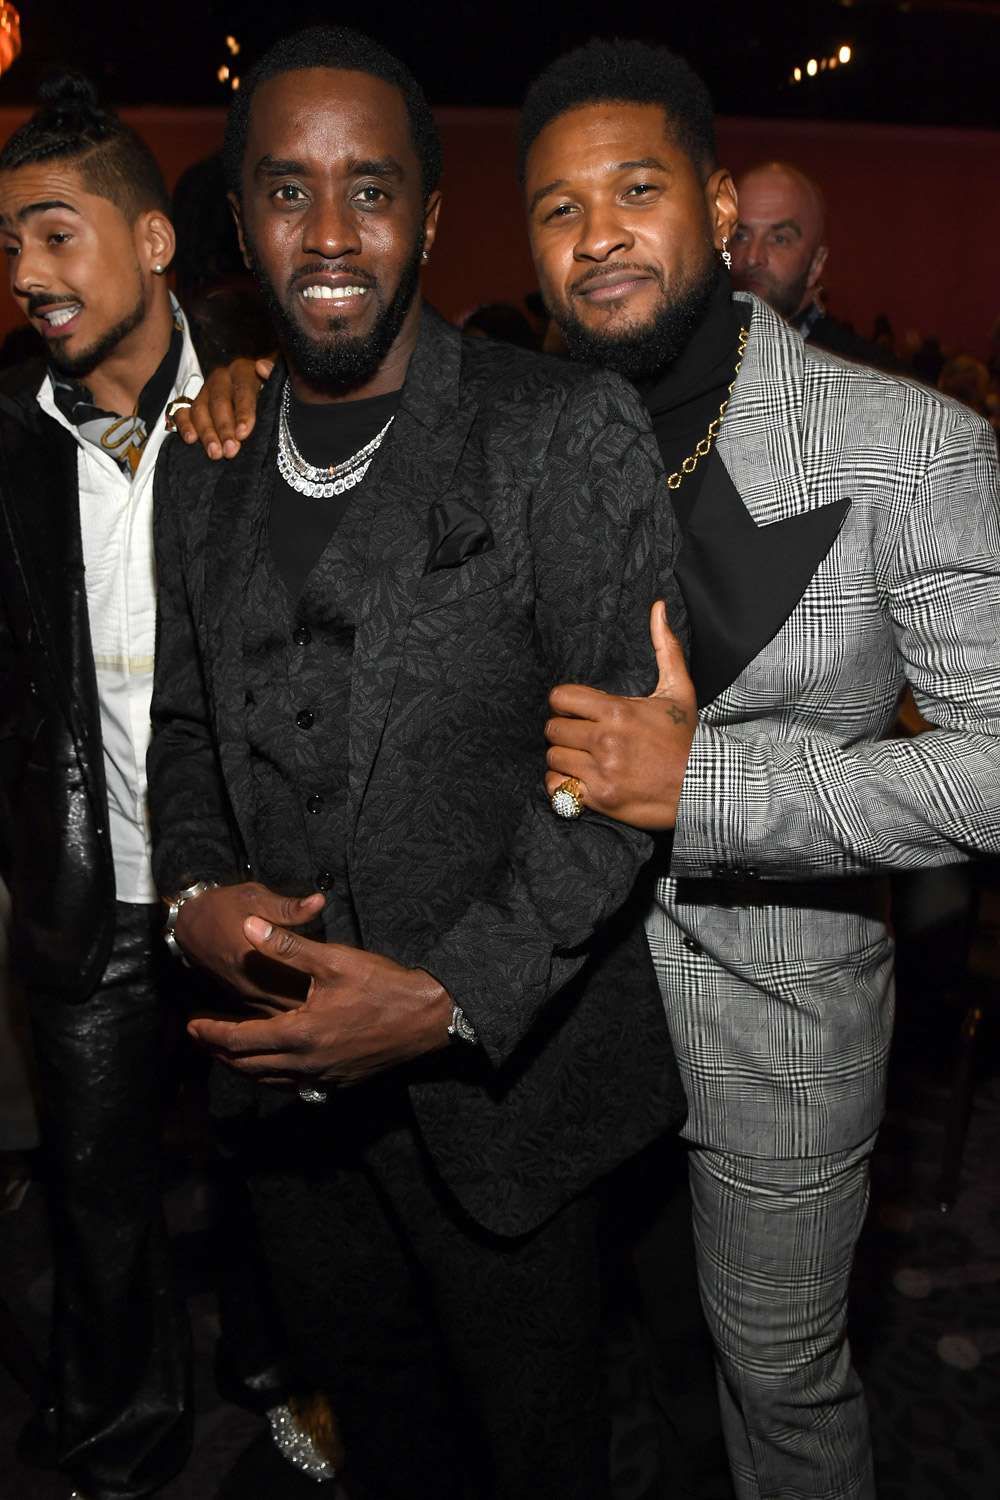 Sean 'Diddy' Combs and Usher attend the Pre-GRAMMY Gala and GRAMMY Salute to Industry Icons Honoring Sean "Diddy" Combs on January 25, 2020